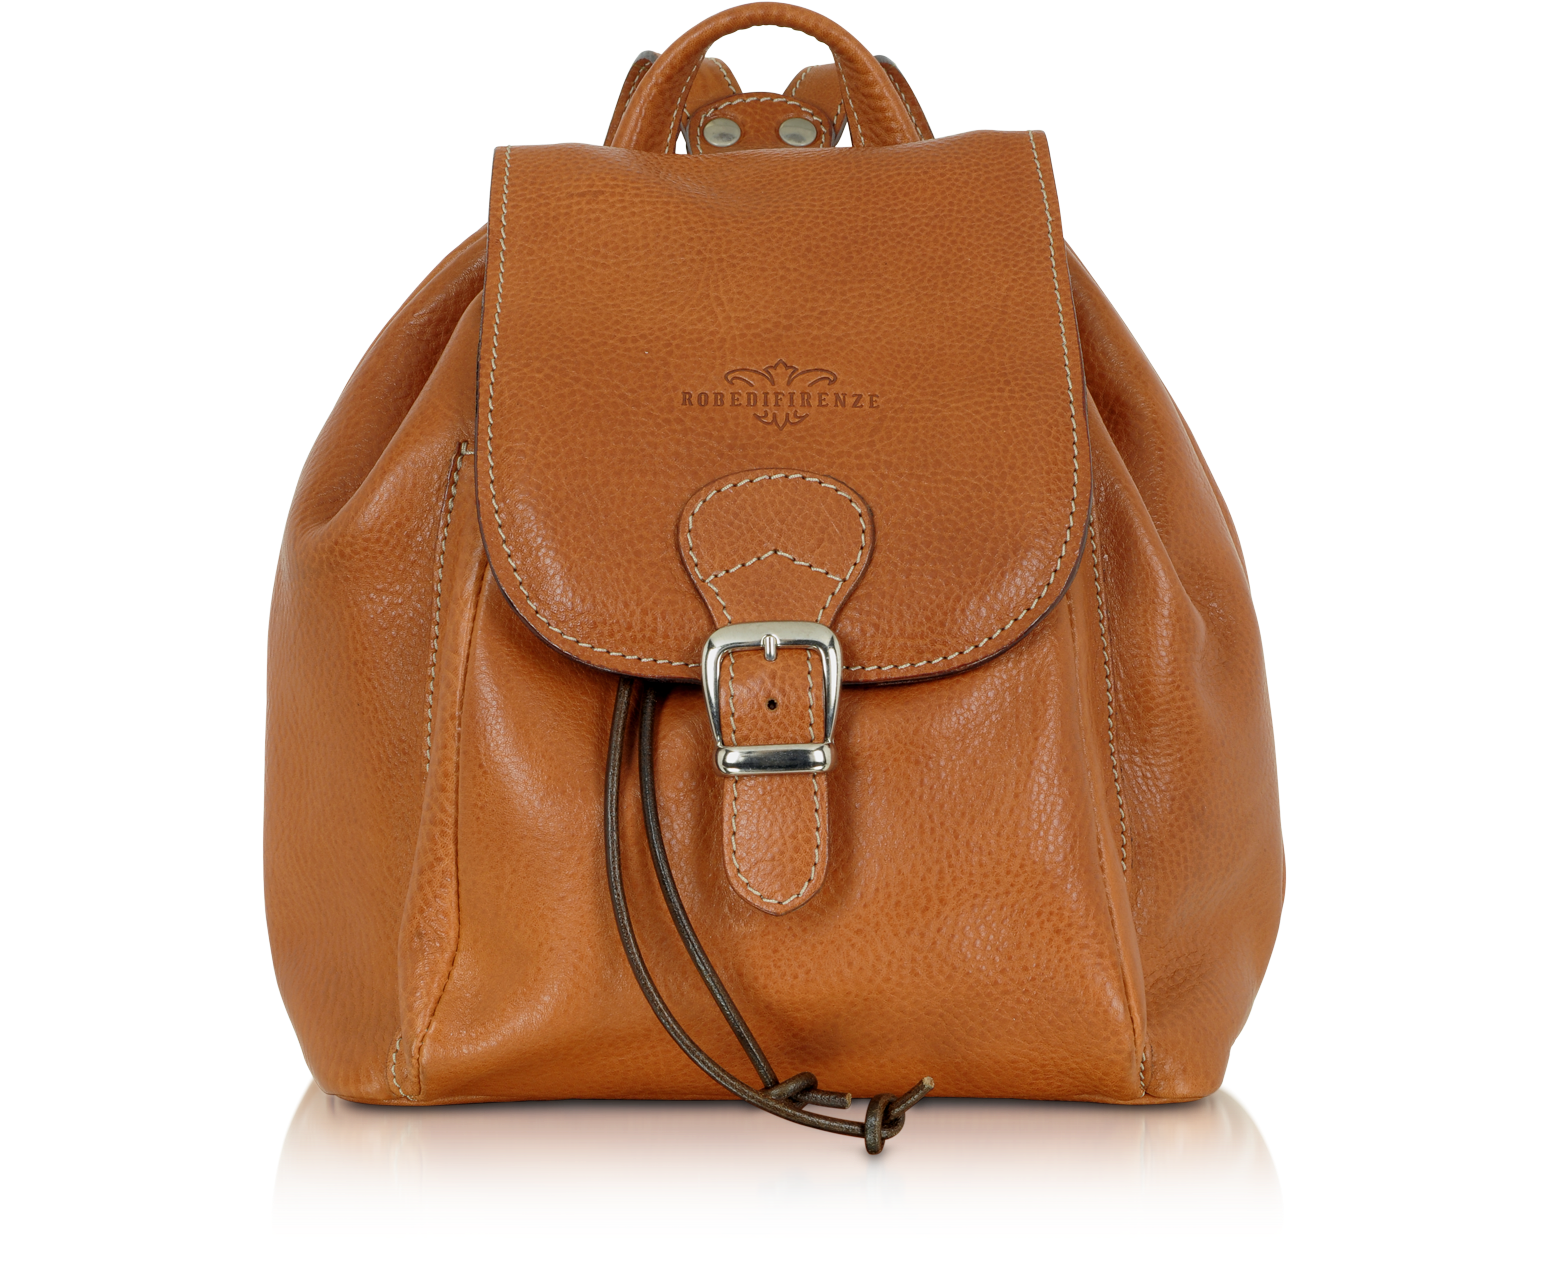 Dune Red Leather Backpack, Made in Italy